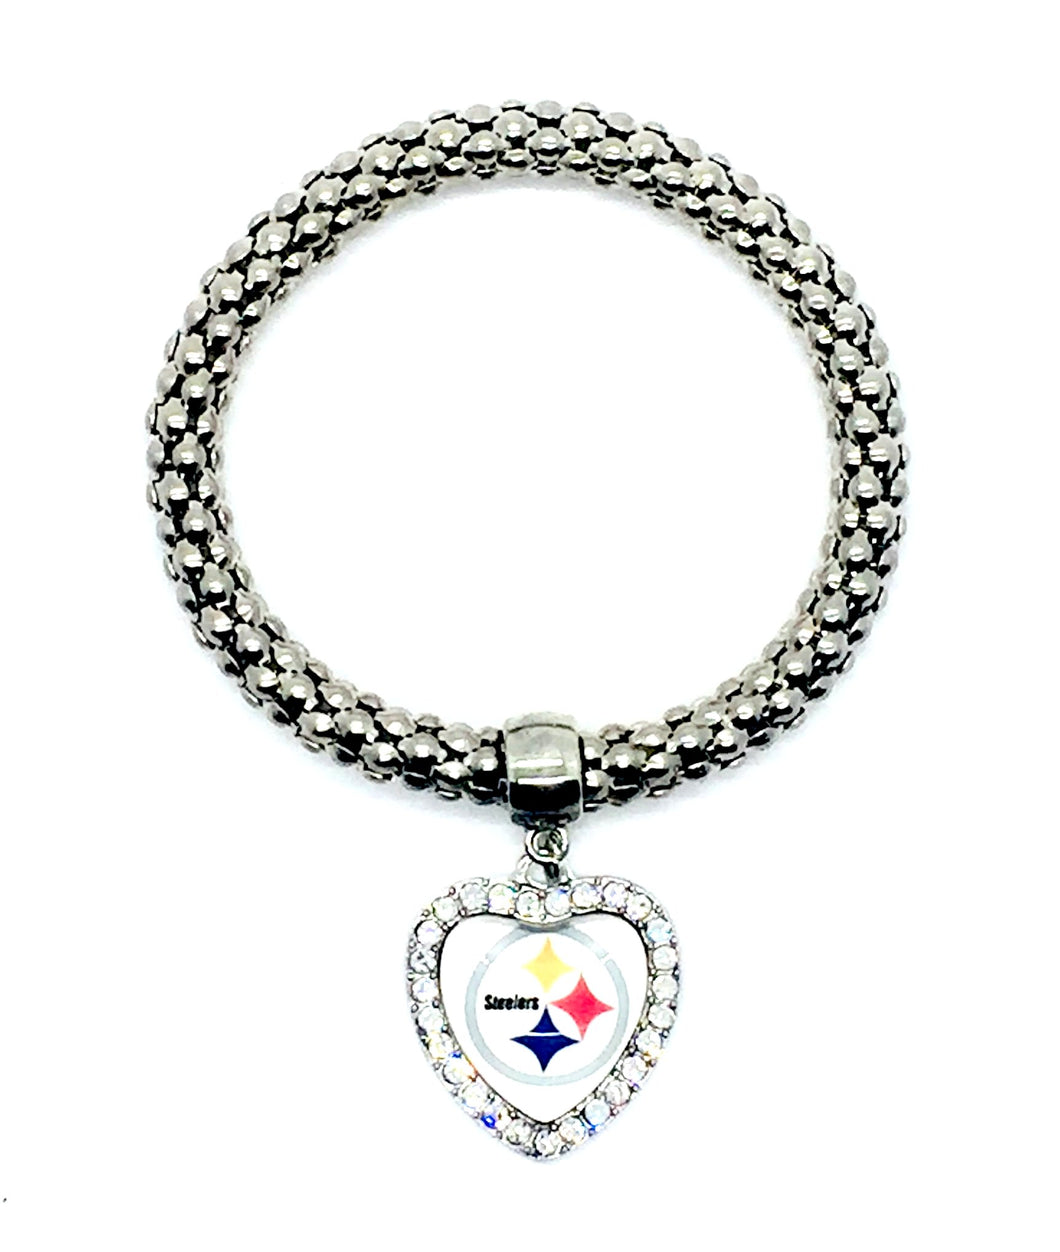 Show the love of your football team with this Steelers pendant bracelet. Heart shaped rhinestone pendant. Stretch bracelet measures 6 1/2